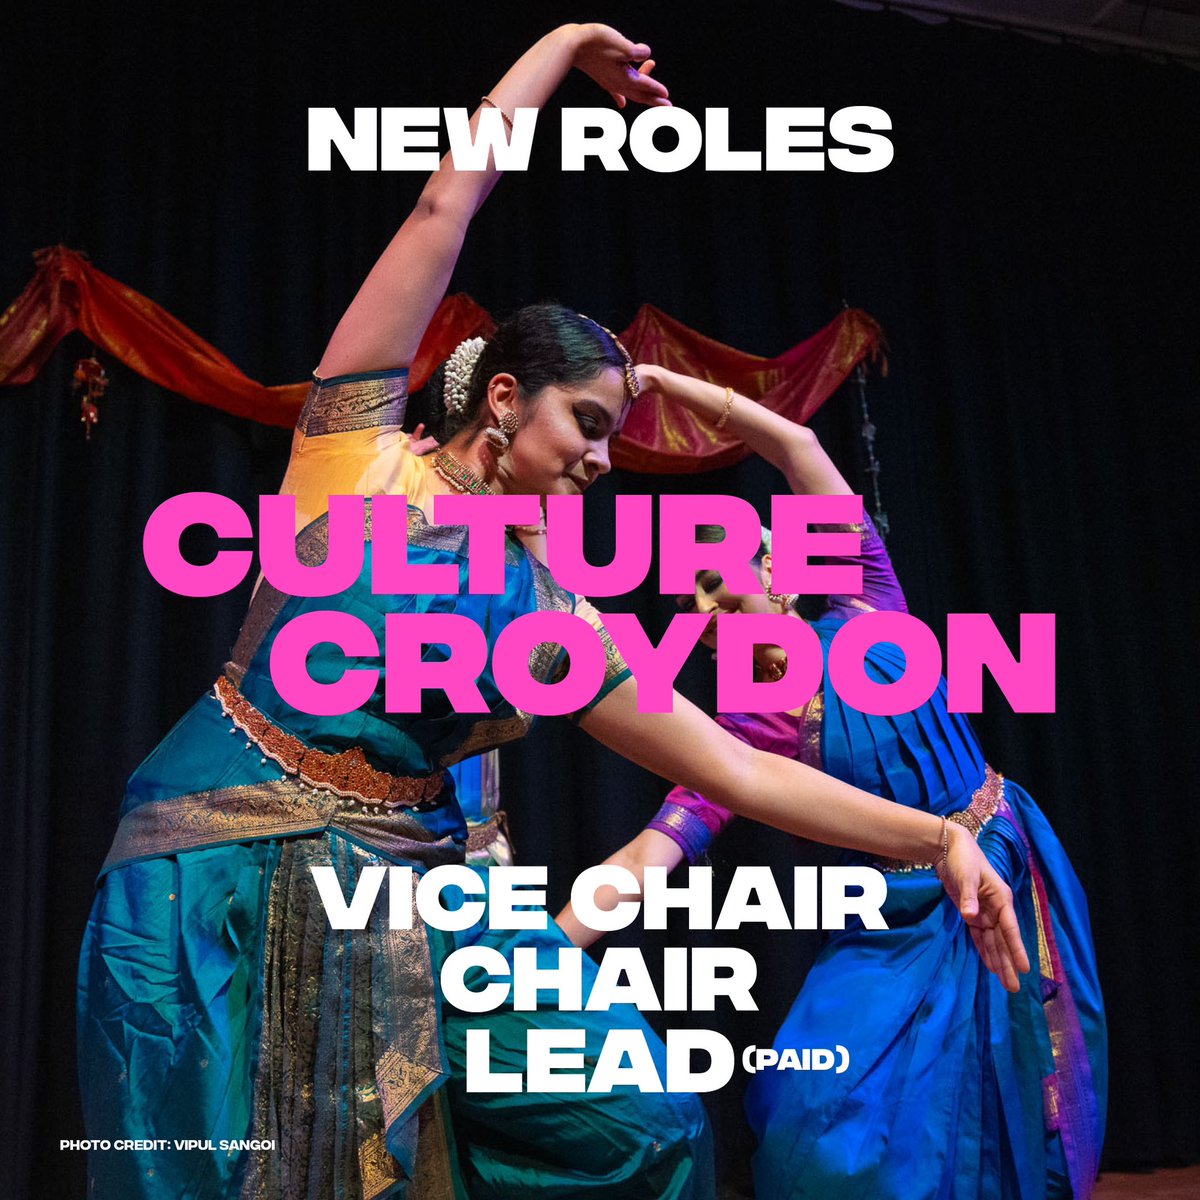 Want to contribute to the legacy of Croydon’s London Borough of Culture year?  
 
We’re looking for a Chair, Vice Chair & Lead (paid) to support delivery of Culture Croydon’s vision.

Closing:
19 Apr: Chair & Vice Chair
3 May: Lead

stanleyarts.org/recruitment 

#ThisIsCroydon #LBOC